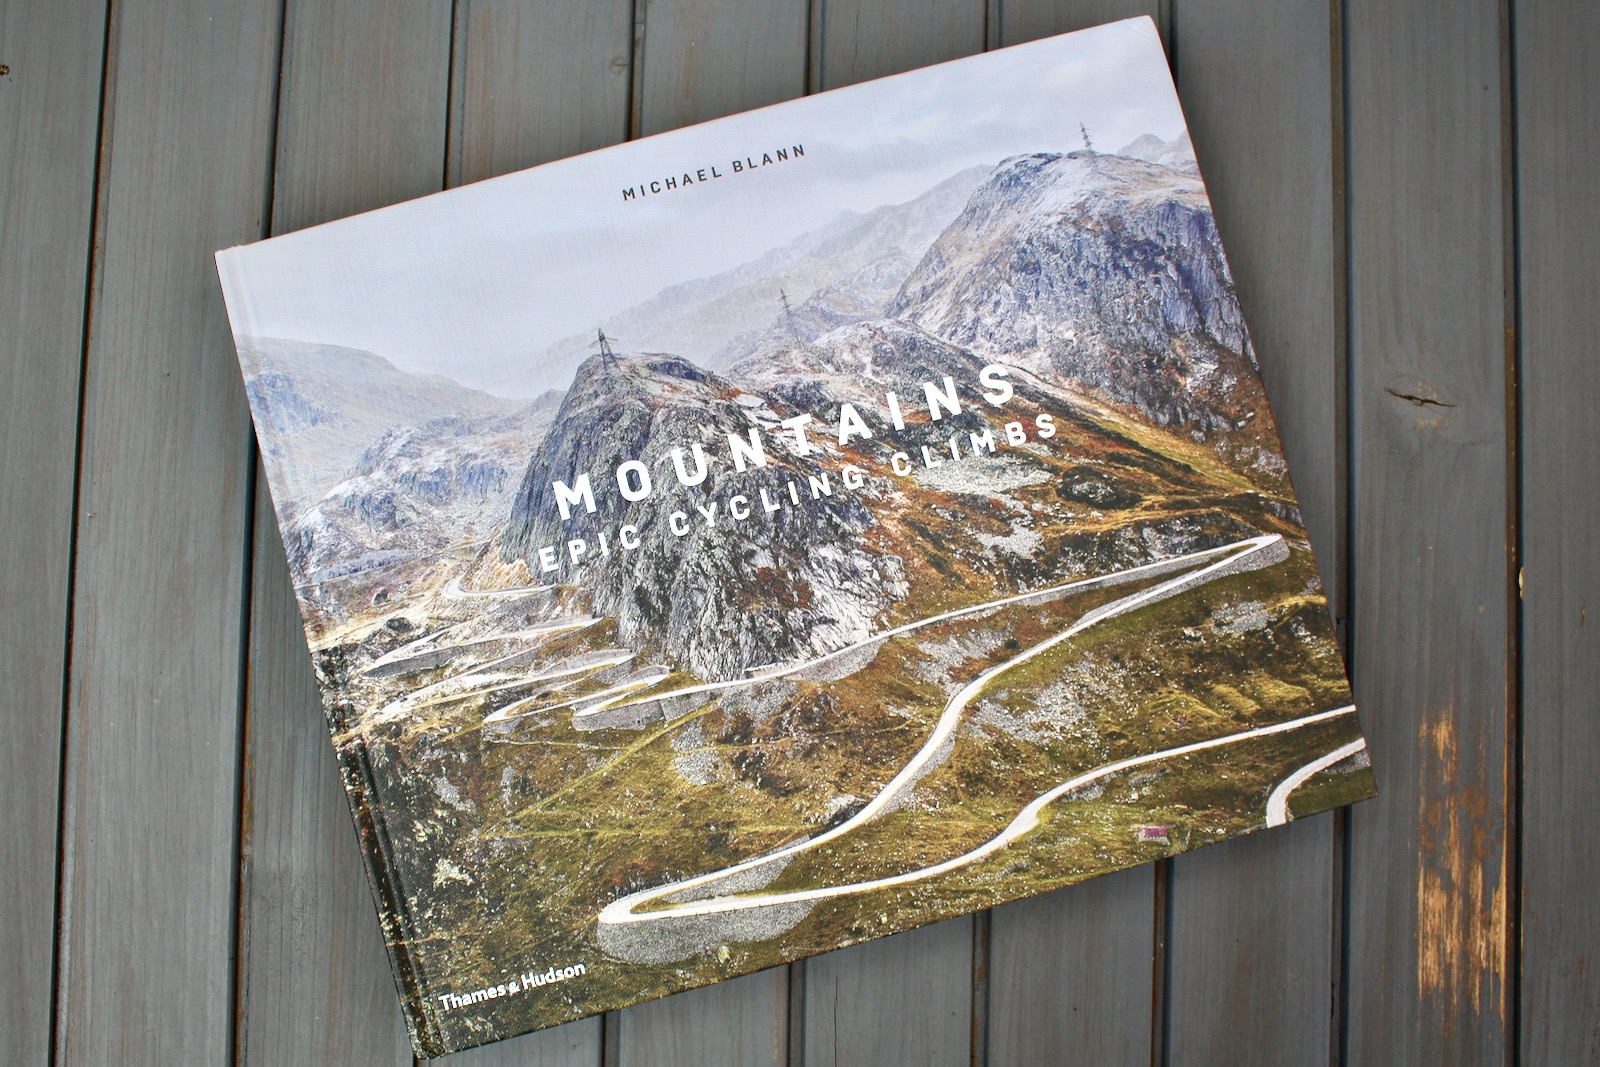 'Mountains : Epic Cycling Climbs' (2nd Edition) by Michael Blann